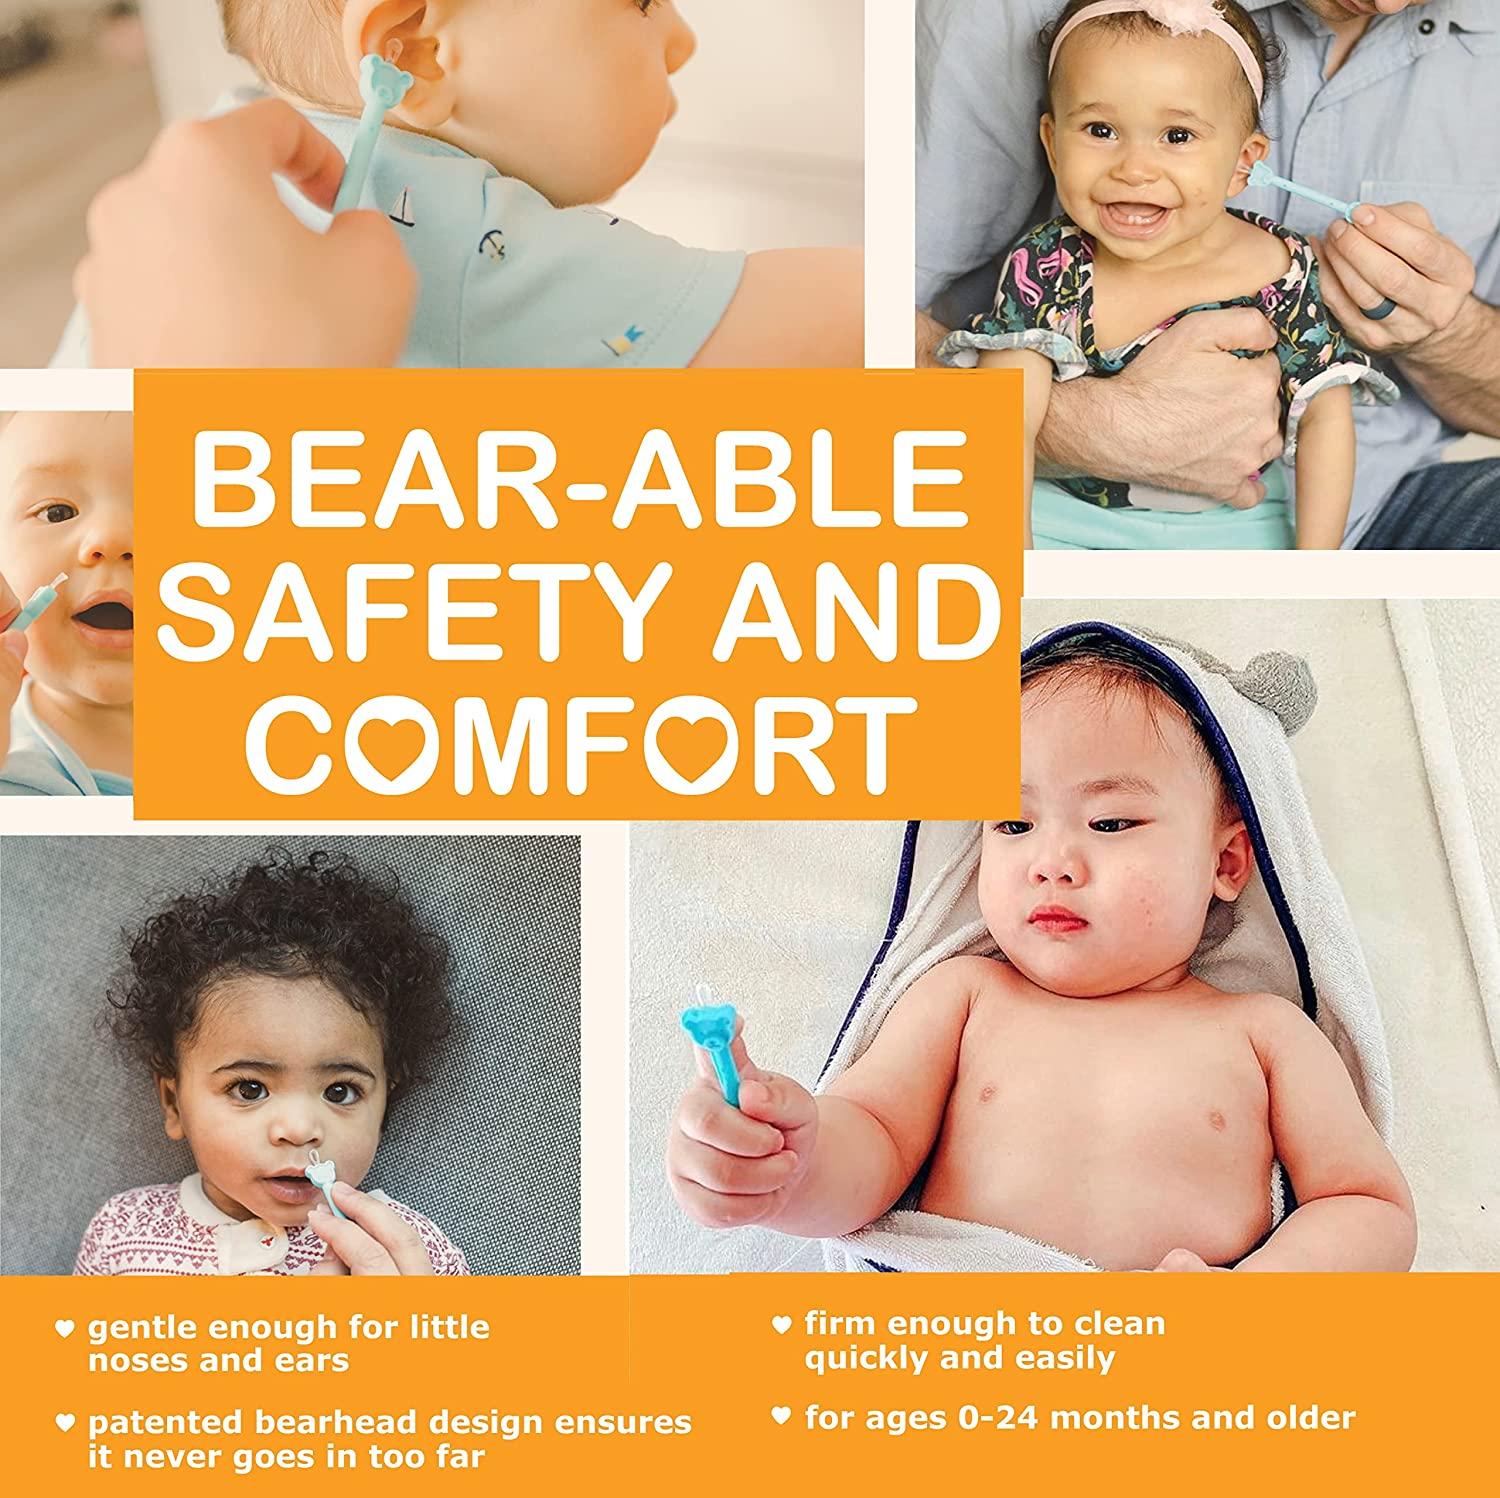 oogiebear - Nose and Ear Gadget. Safe, Easy Nasal Booger and Ear Wax  Remover for Newborns, Infants and Toddlers. Dual Earwax and Snot Remover.